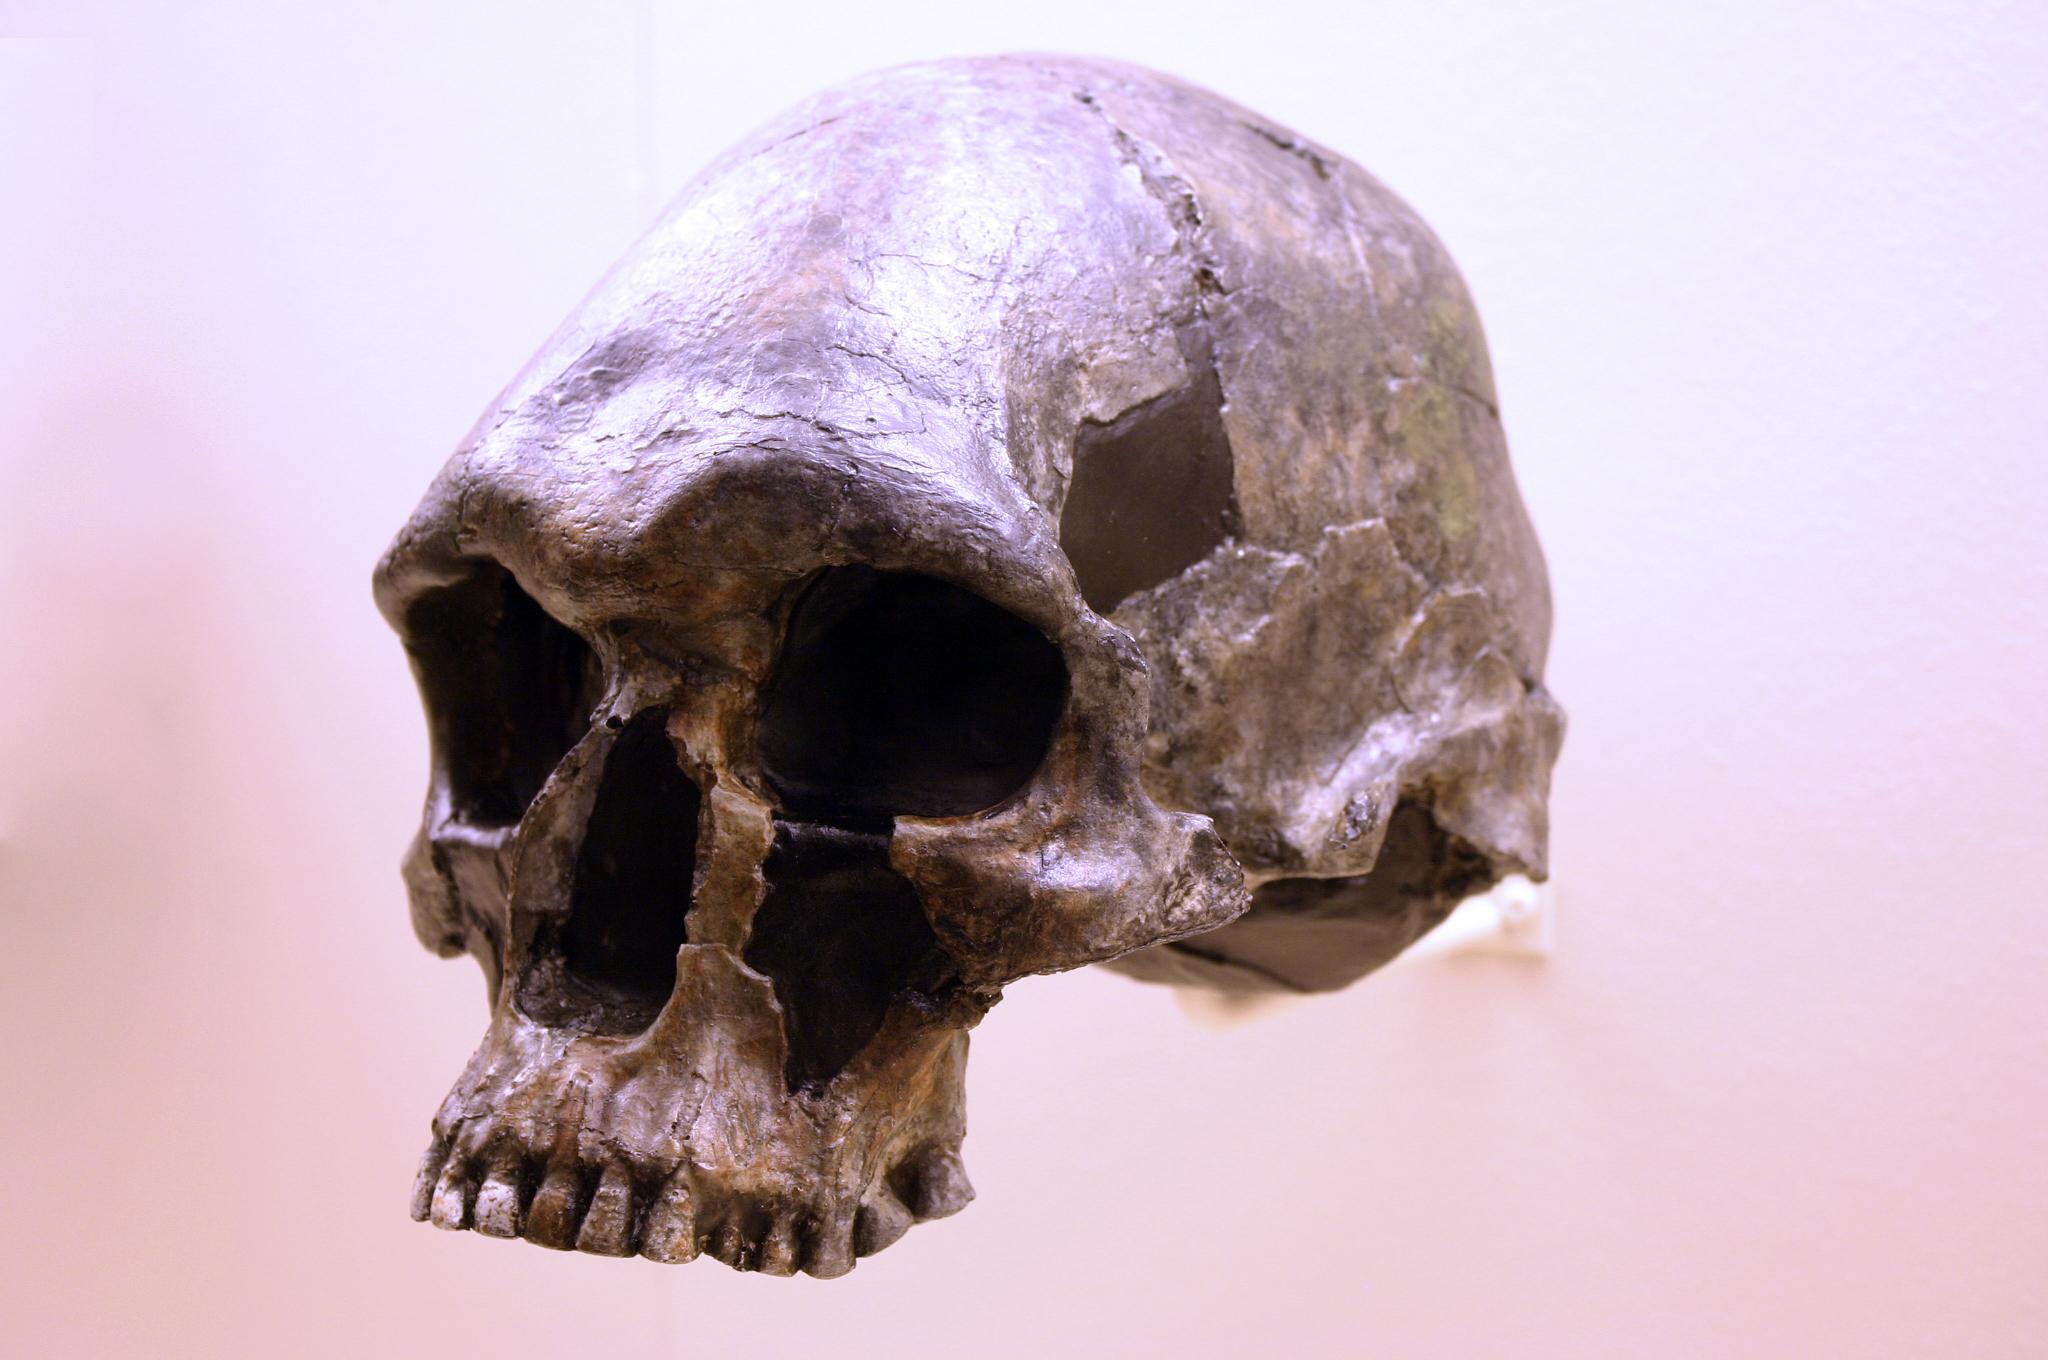 A cranium showing a diagonal sloping forehead.